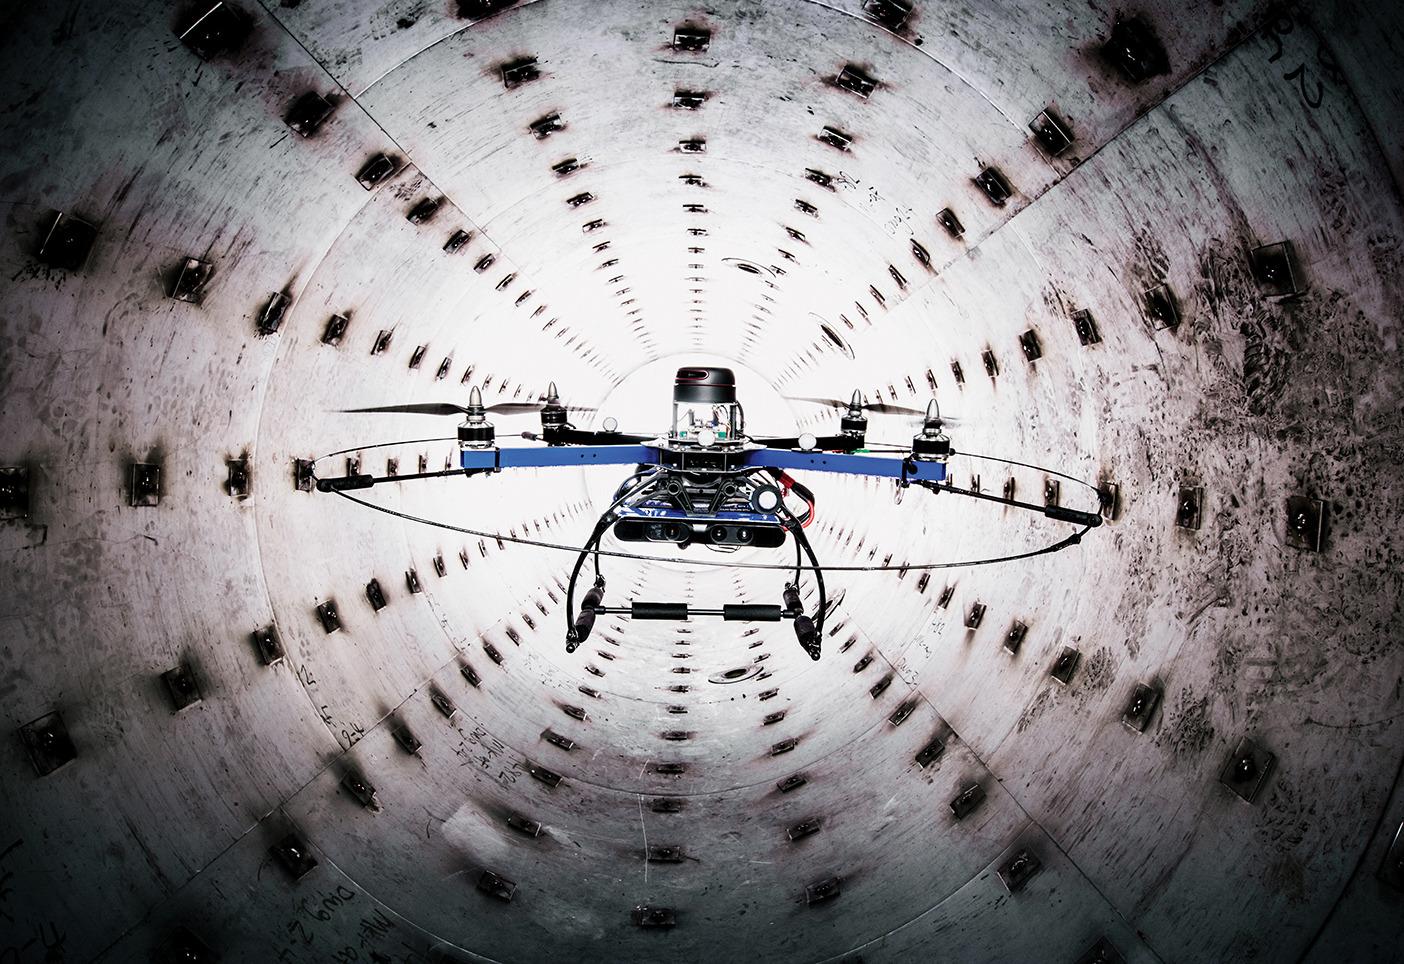 BYU-created drone quadcopter navigating through a tunnel.